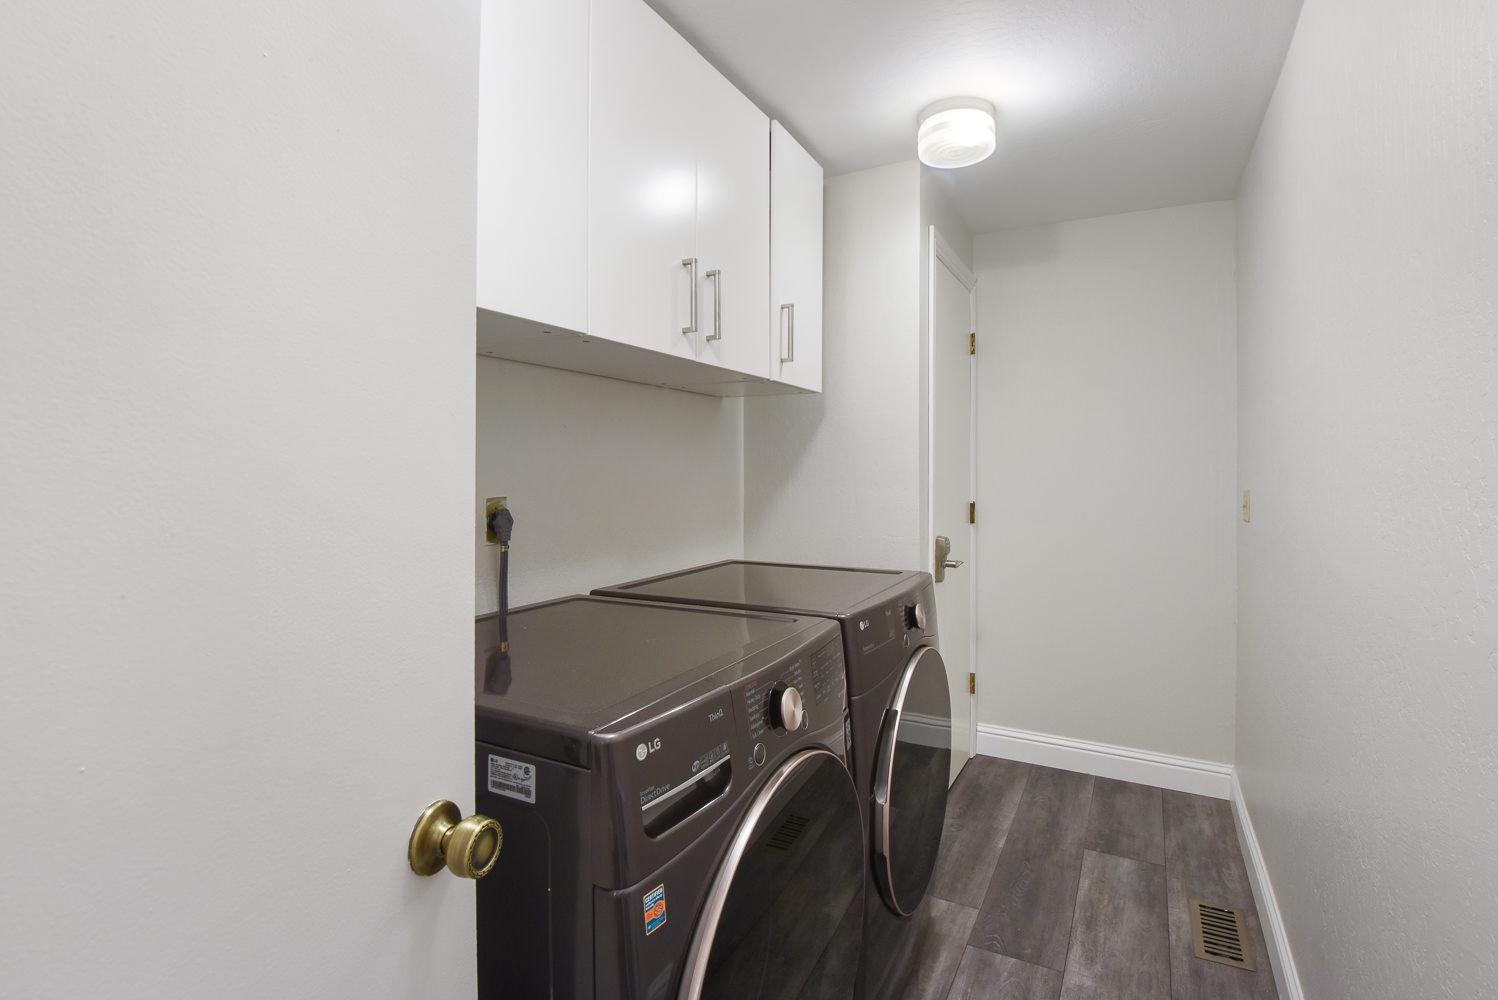 Laundry room located by the kitchen